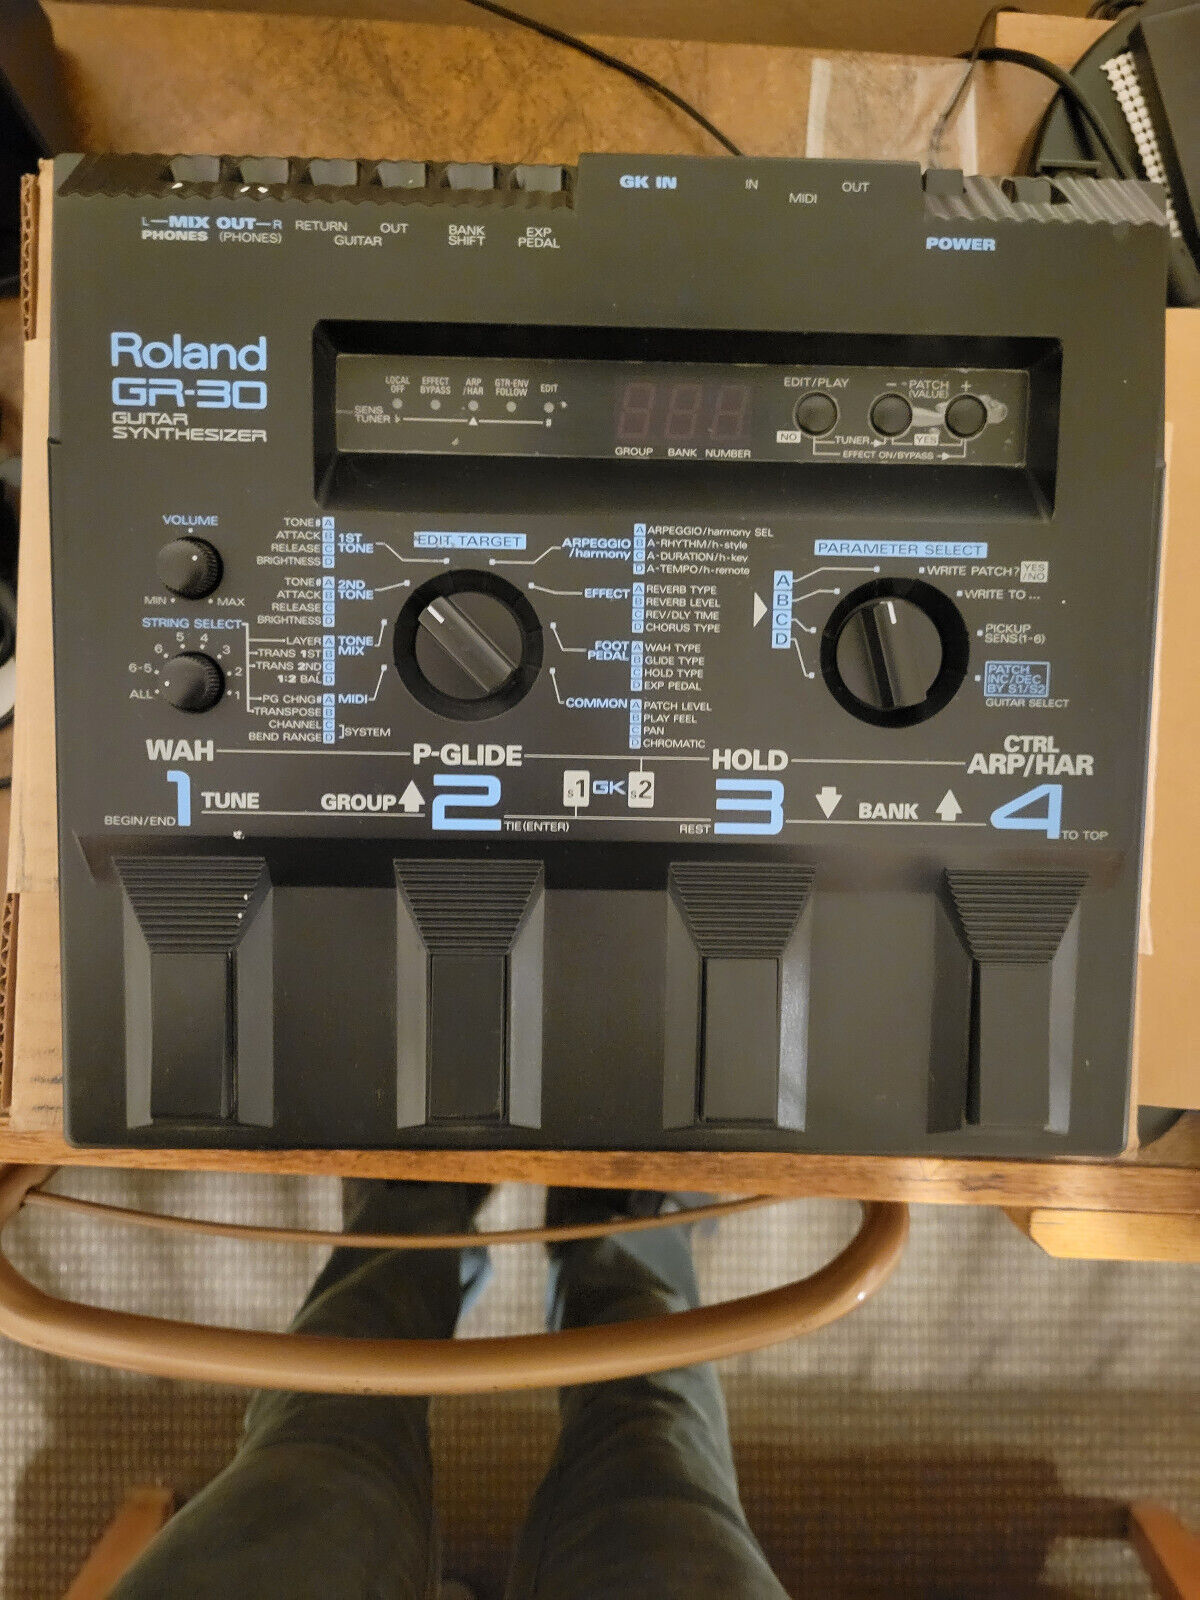  Roland GR-30 Guitar Synthesizer with power transformer & original owners manual